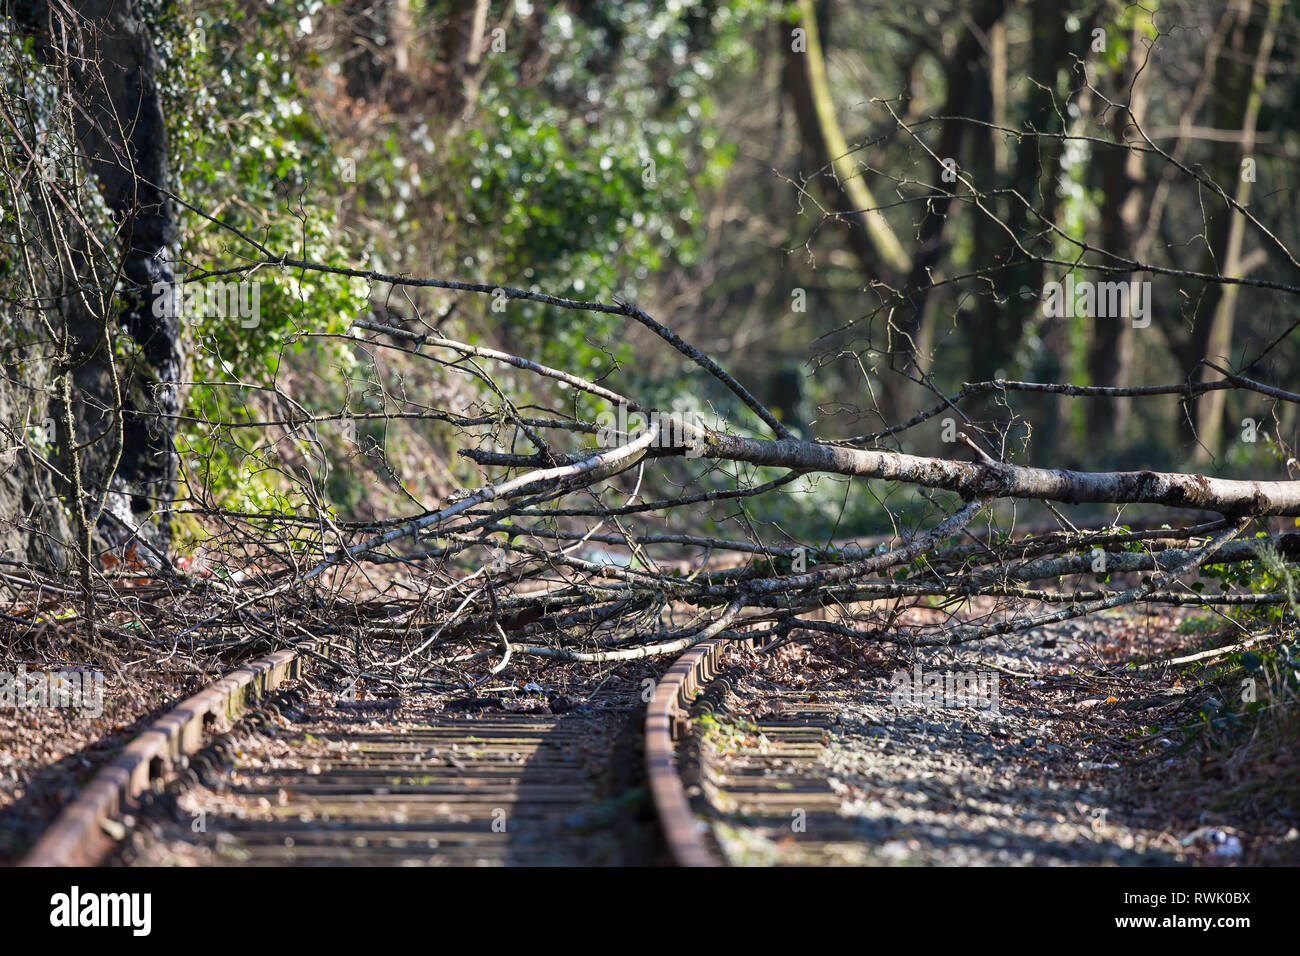 Abandoned UK railway track and fallen tree obstruction. Disused, old rural railway line, railroad track in dappled winter sunshine. UK railways. Stock Photo